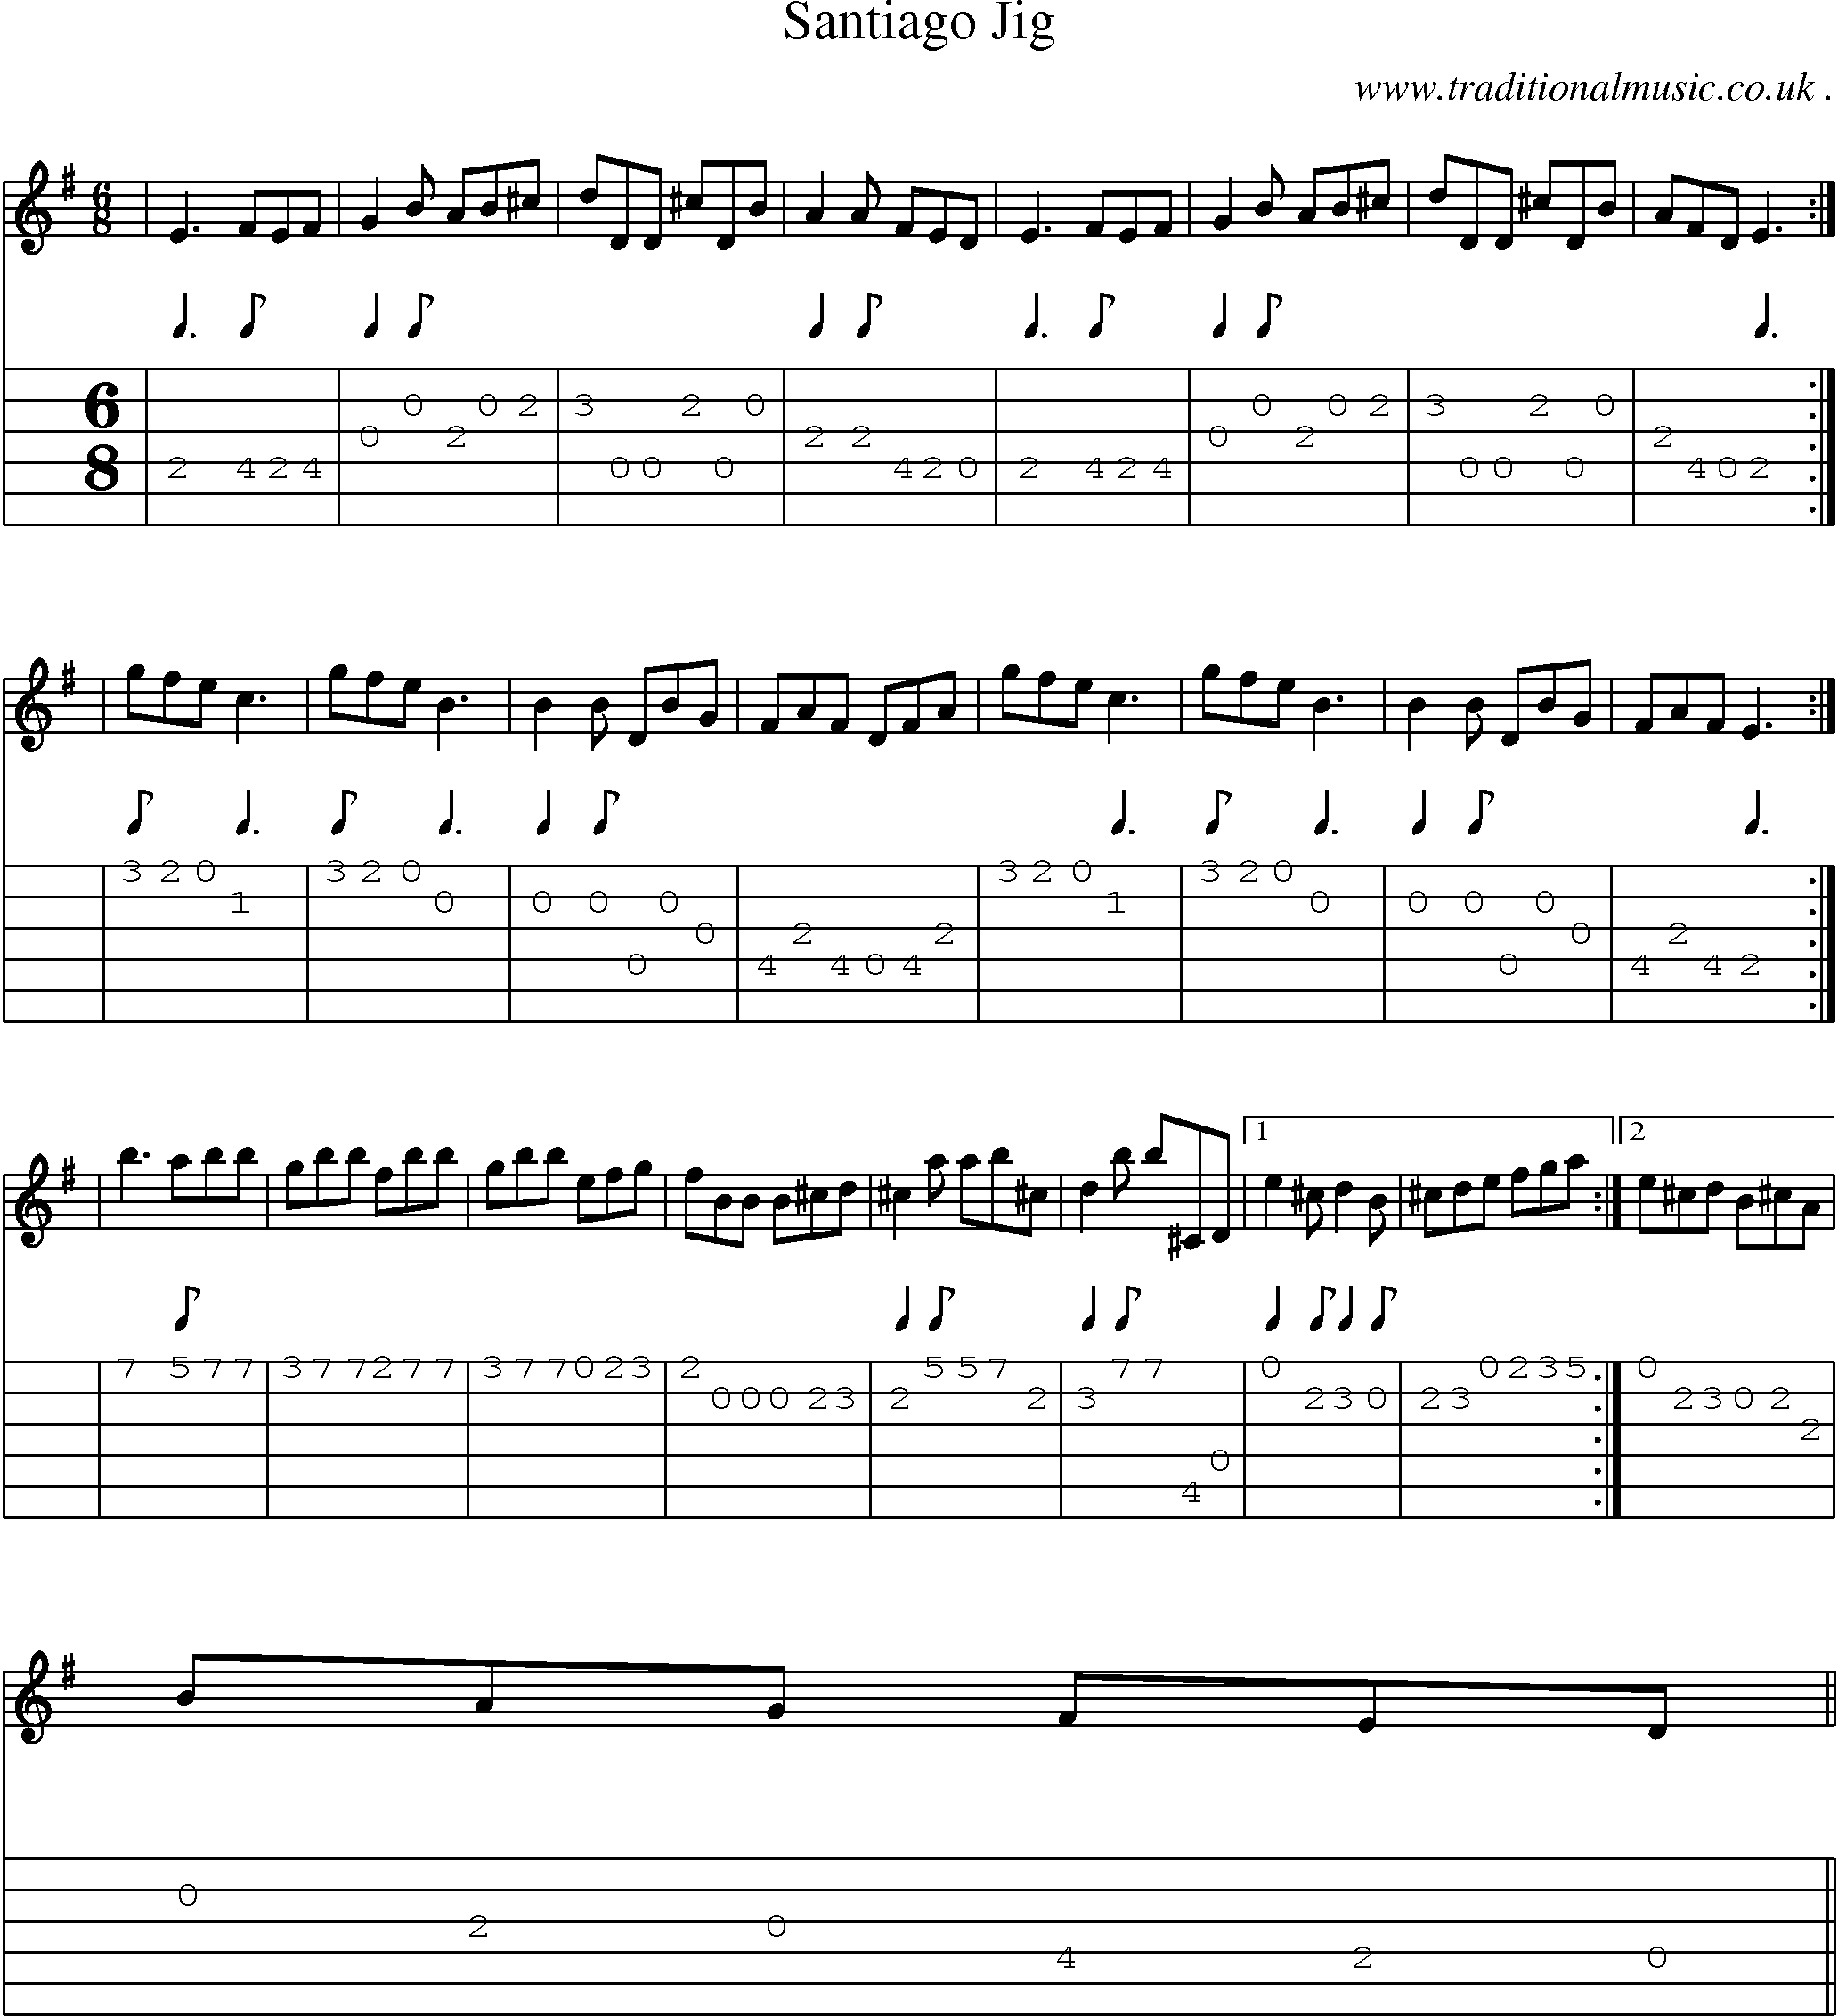 Sheet-music  score, Chords and Guitar Tabs for Santiago Jig